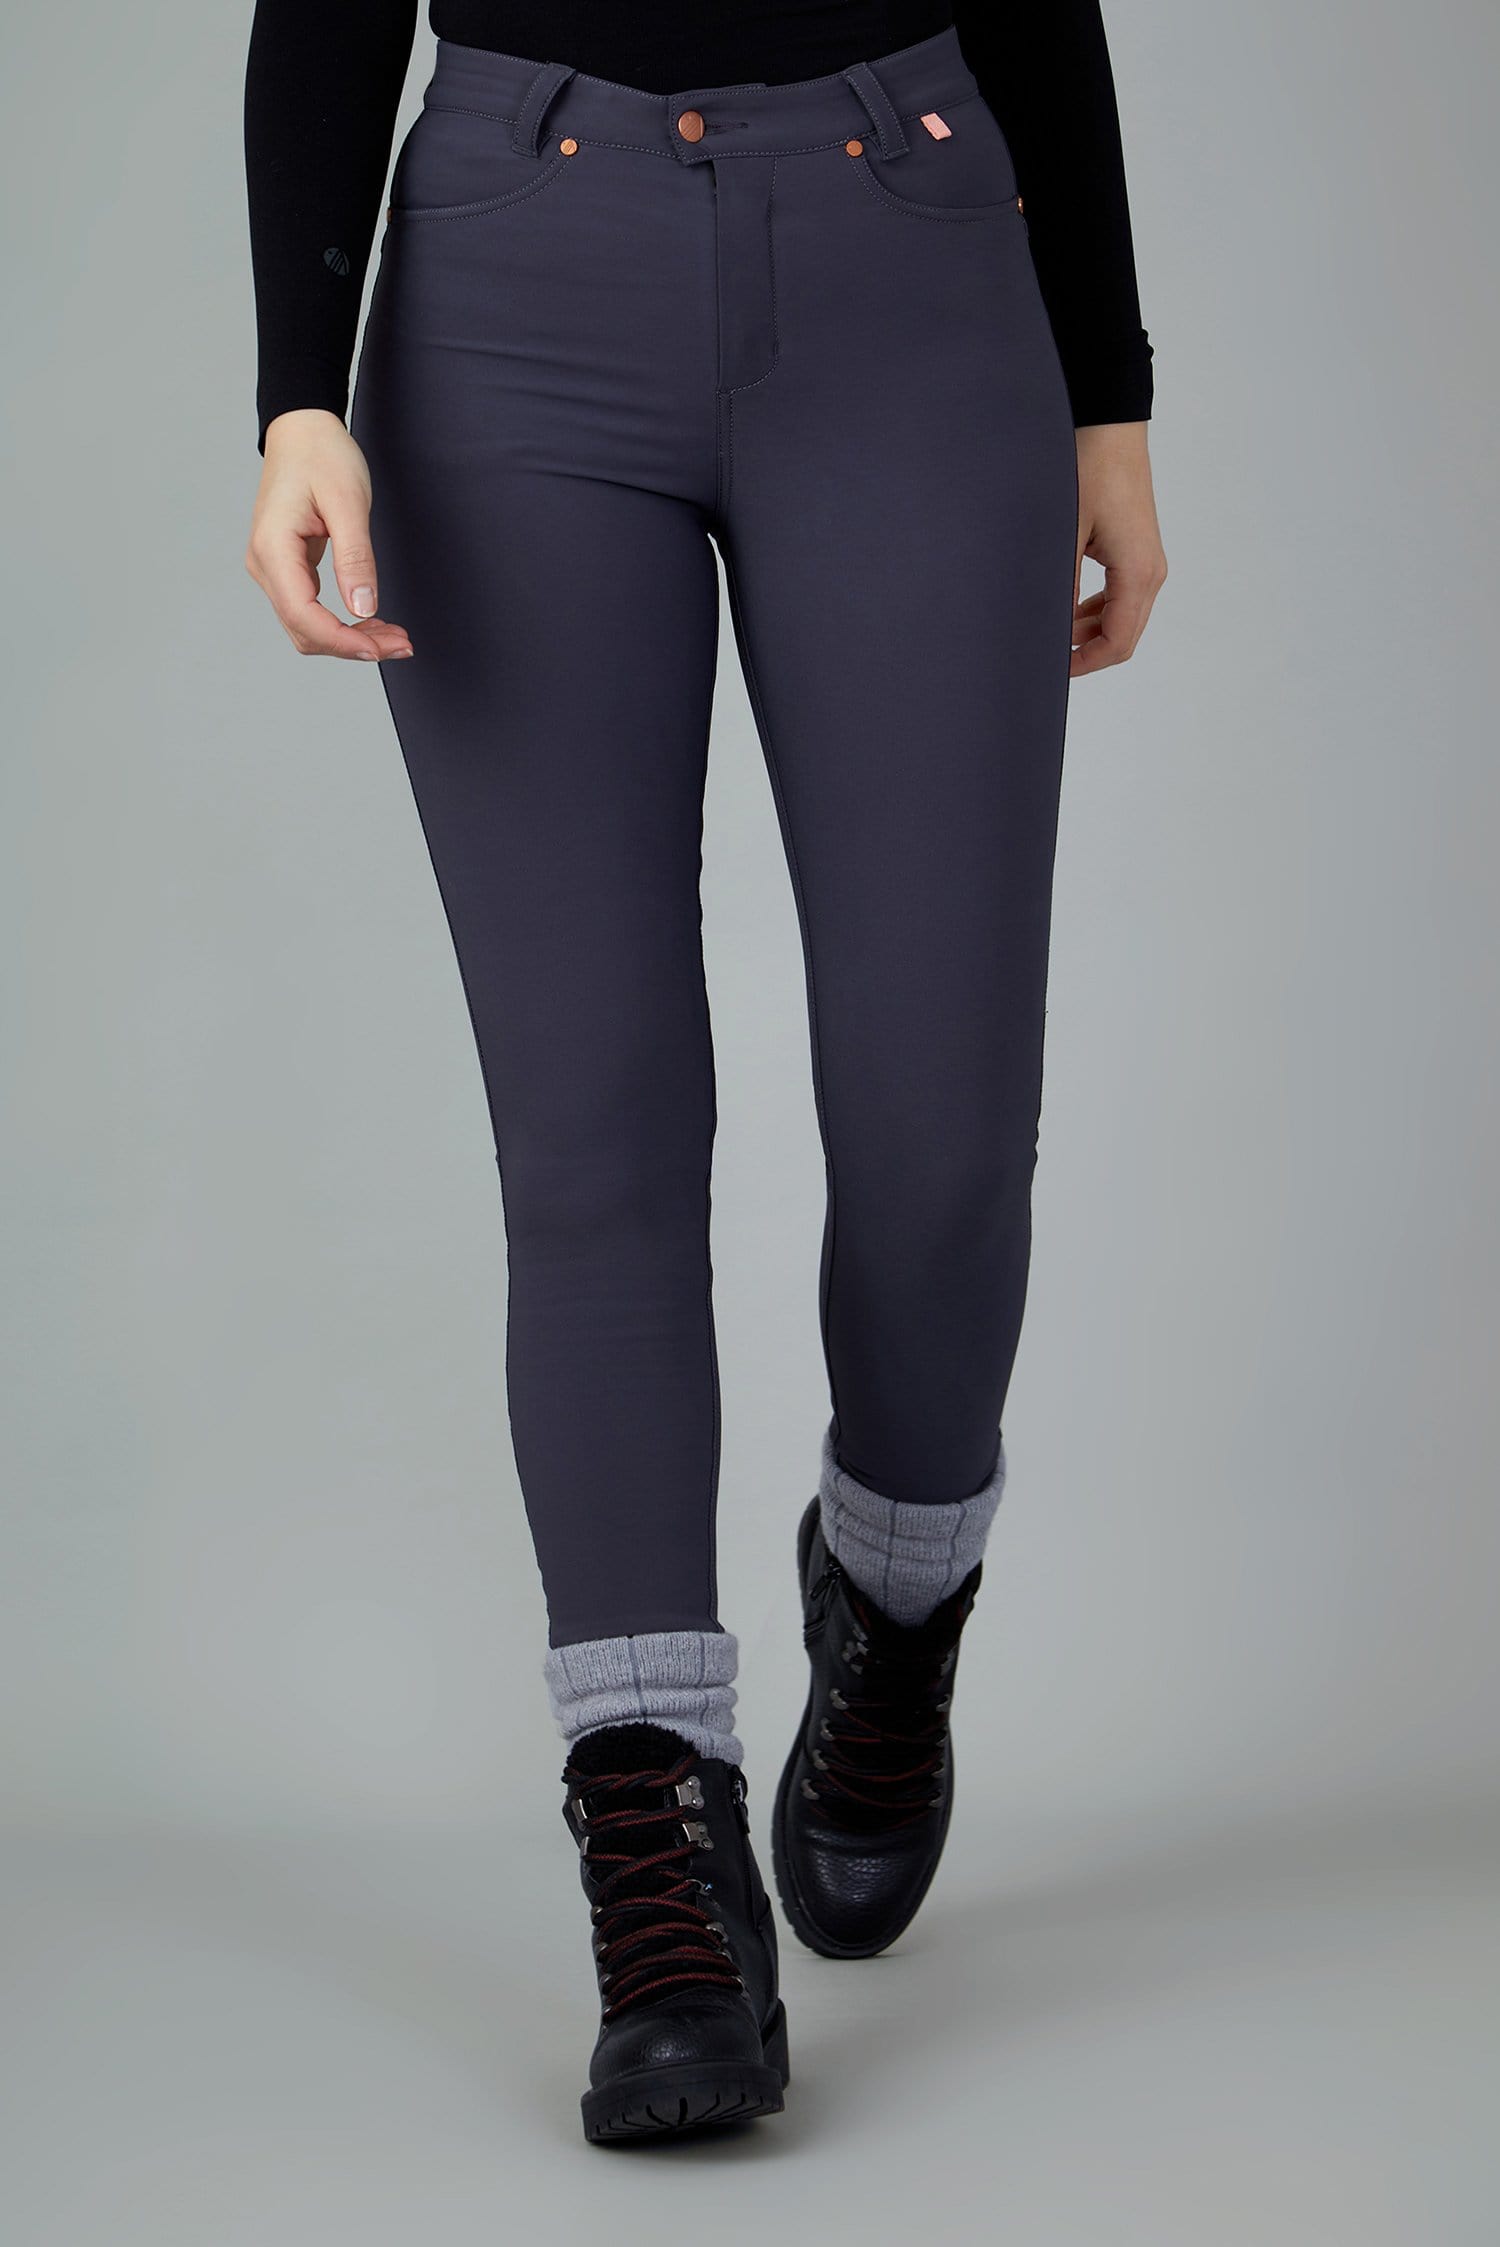 The Aventurite Stretch Skinny Outdoor Trousers - Obsidian - 26xl / Uk8 - Womens - Acai Outdoorwear